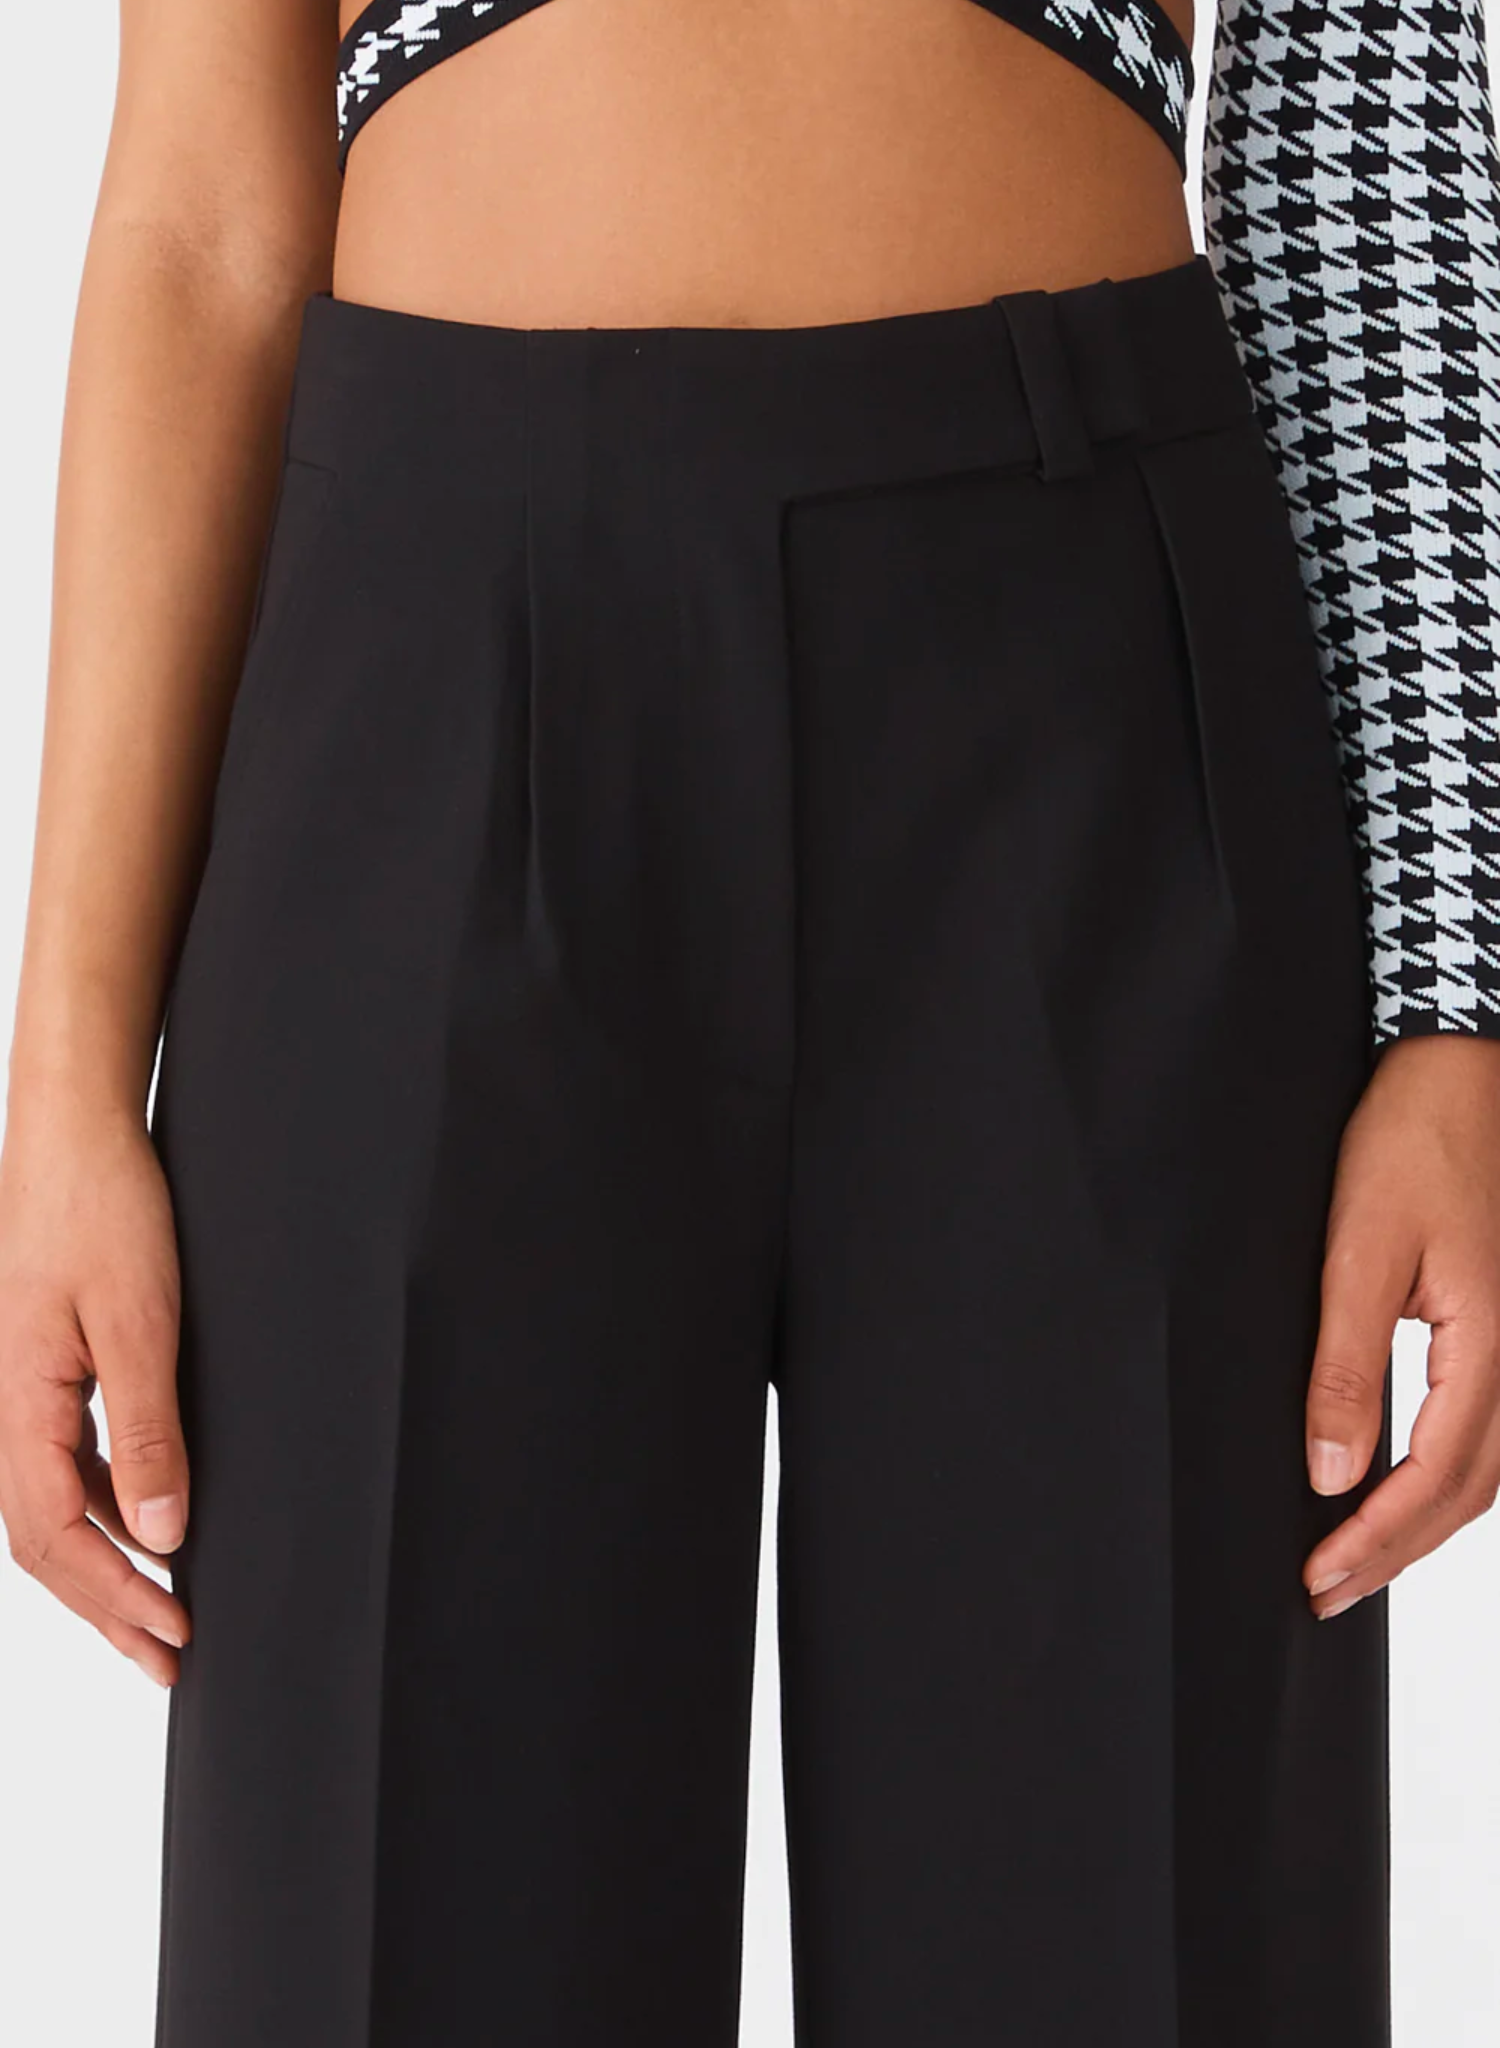 Classic high waist tailored pant, Medium weight woven suiting fabrication without stretch, Pleat front detail, Side pockets, Clasp closure at waist band, zip fly Faux pocket detail at the back 